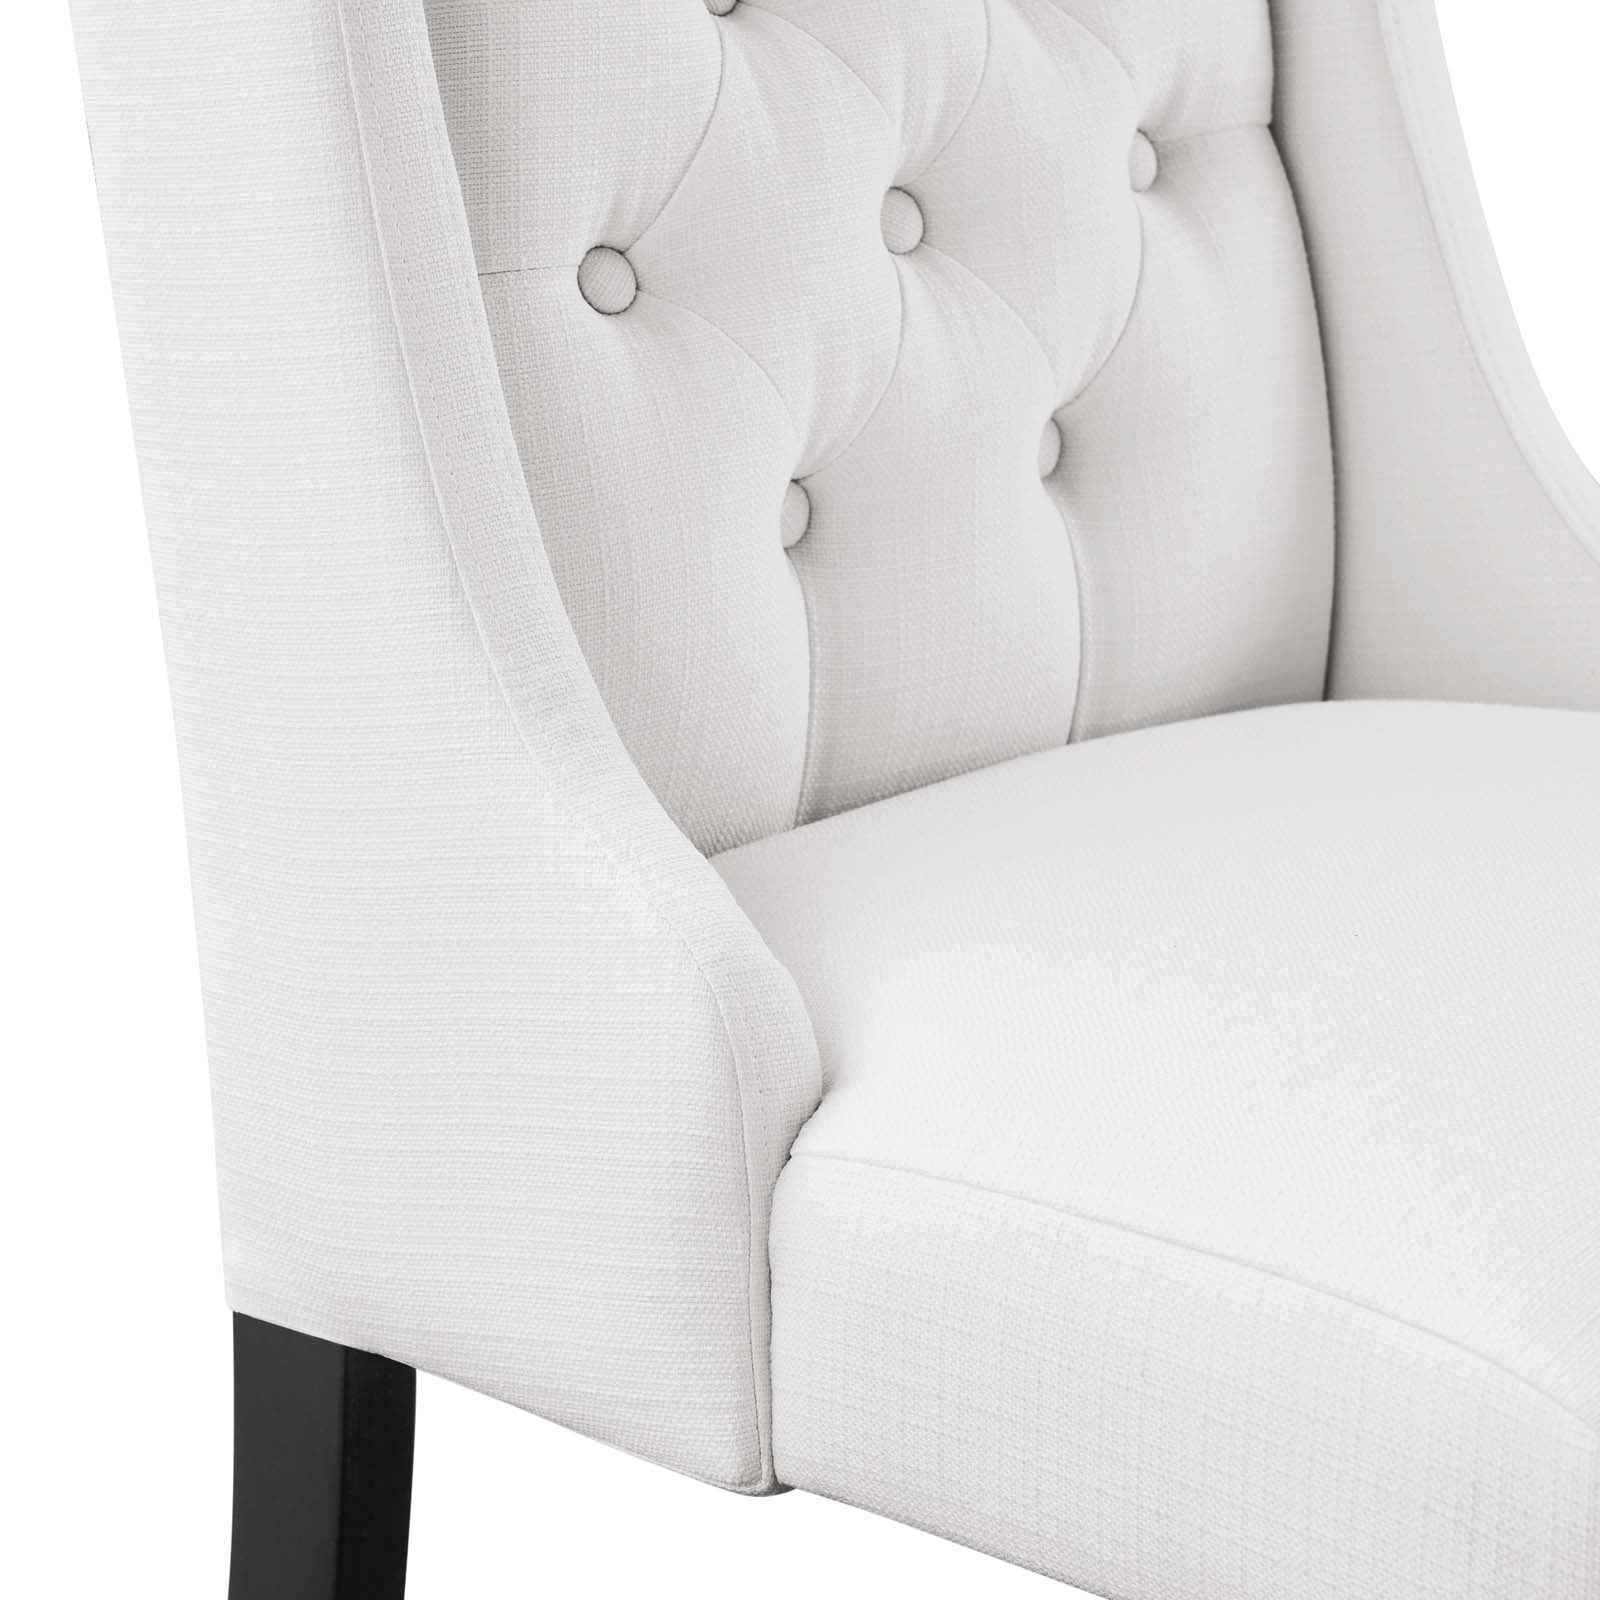 Baronet Button Tufted Fabric Dining Chair